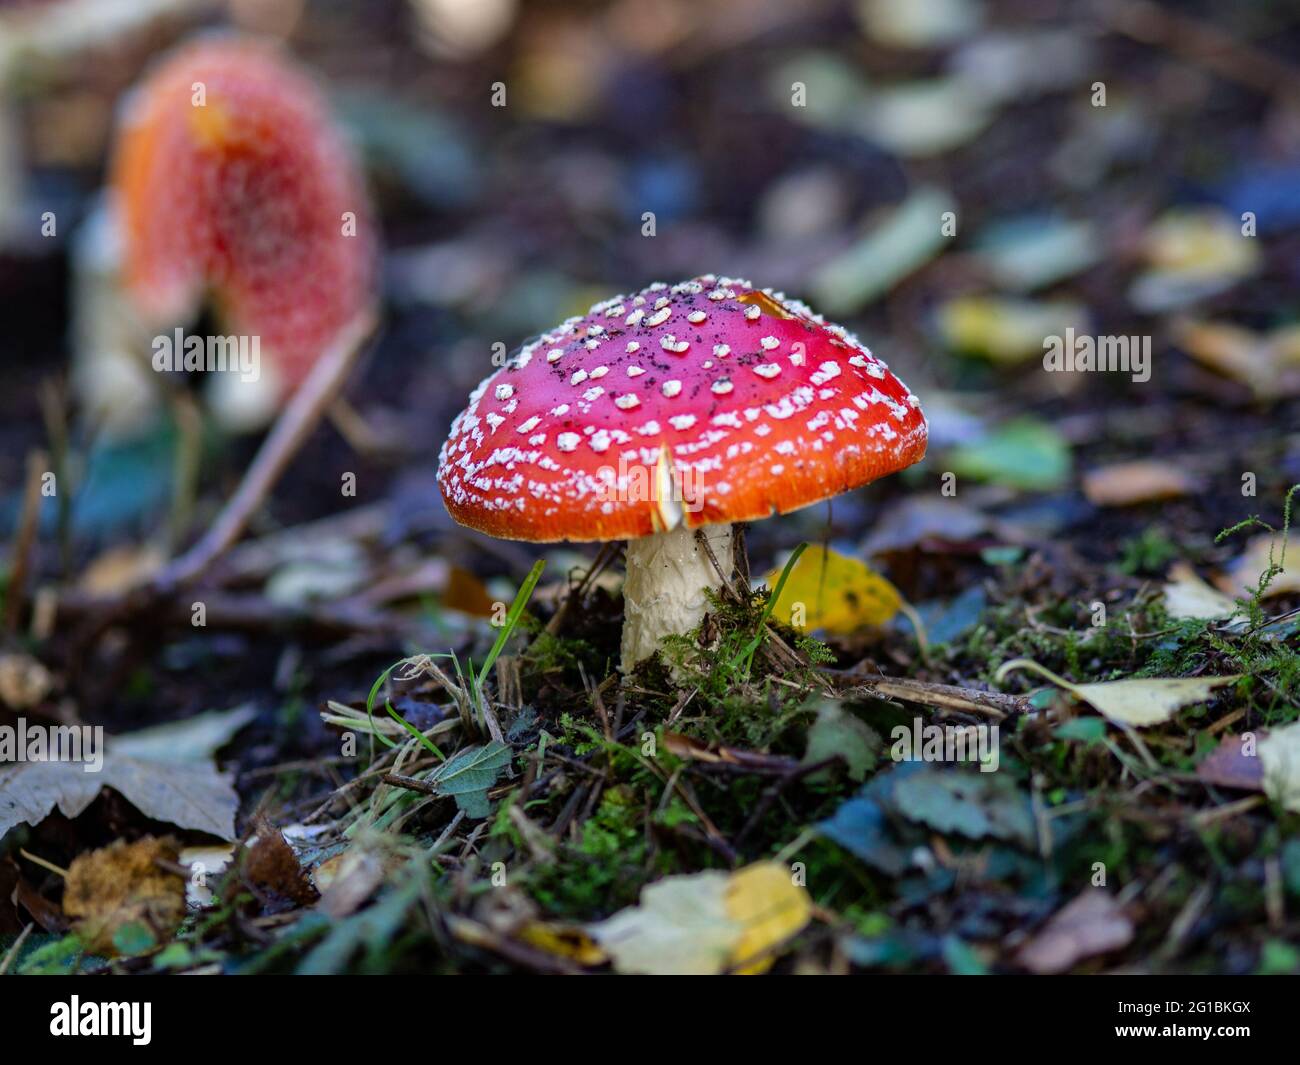 Mushroom Red And White Spots Fly Agaric [Amanita Muscaria] UK Stock Photo